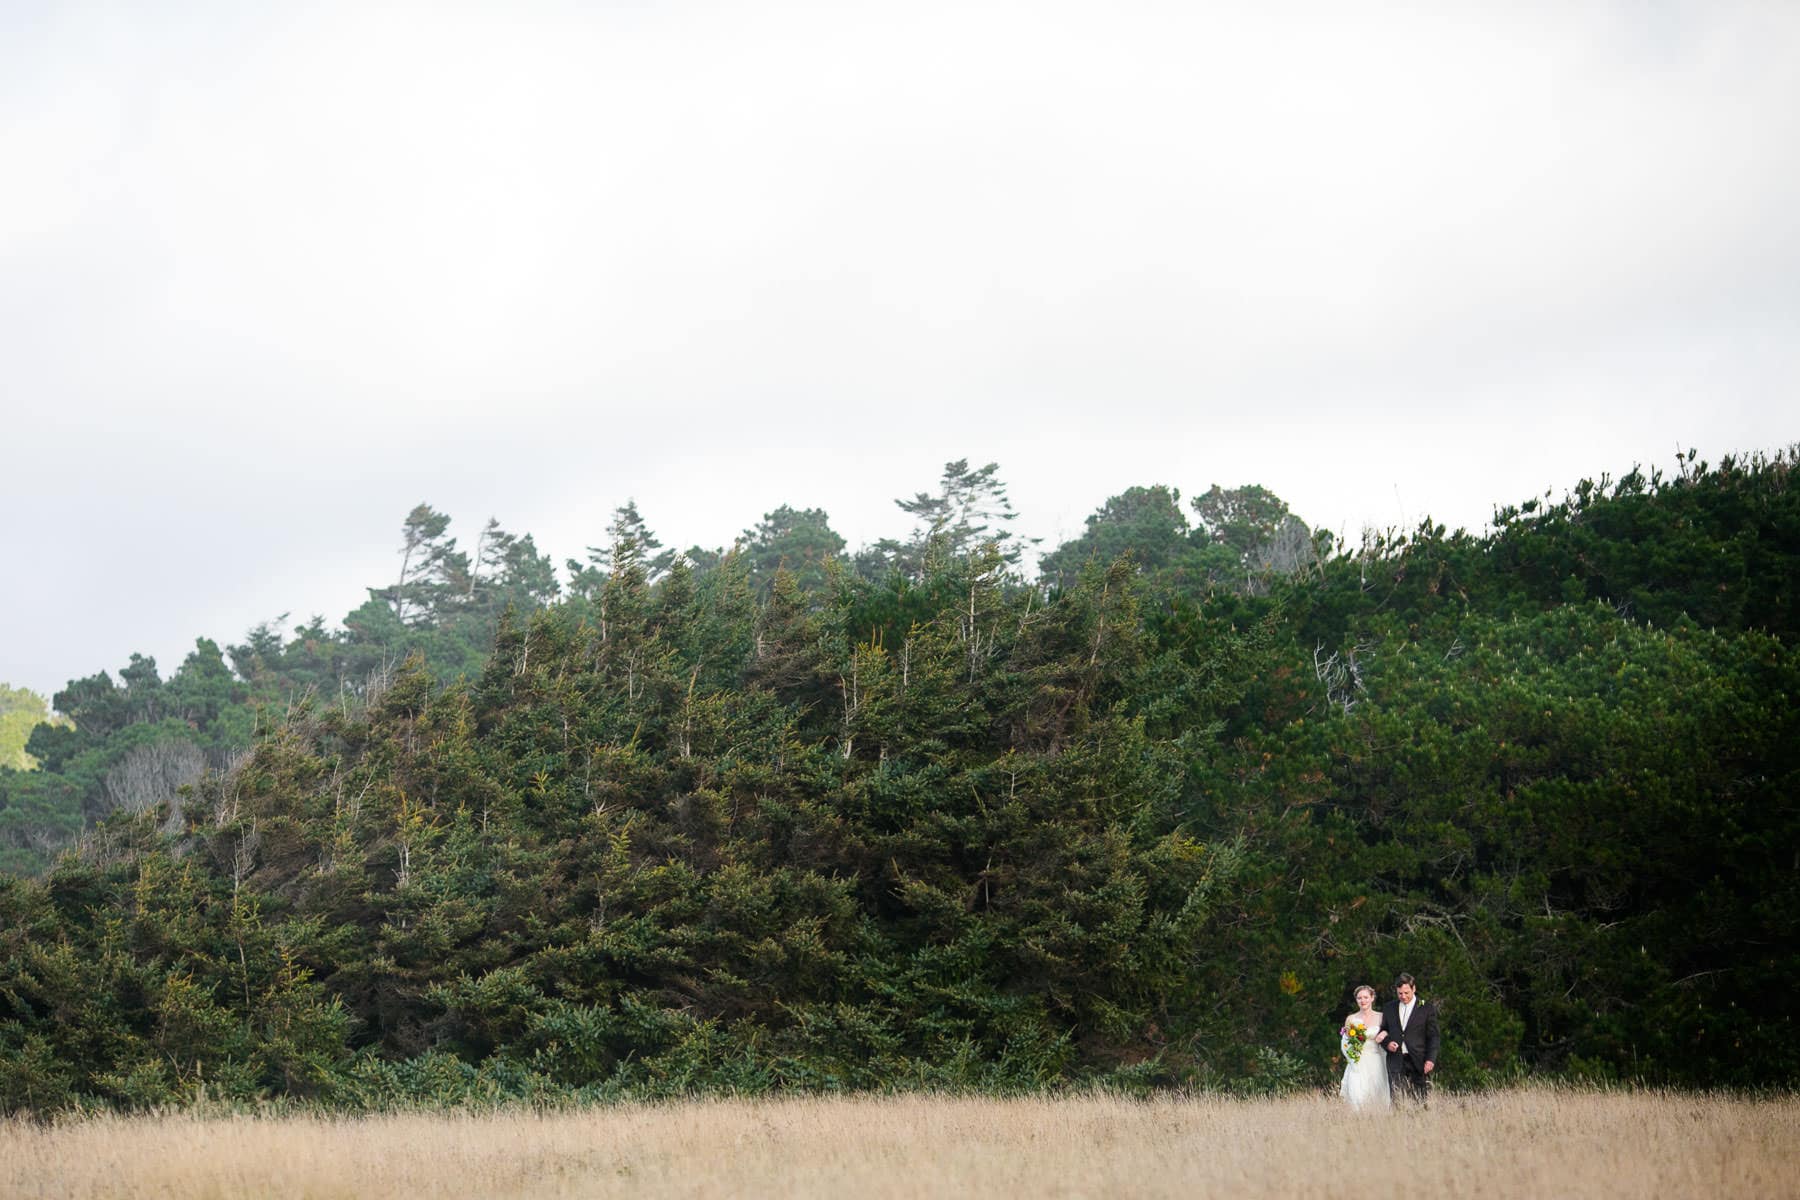 Bride and her father walking trhorugh a field far away